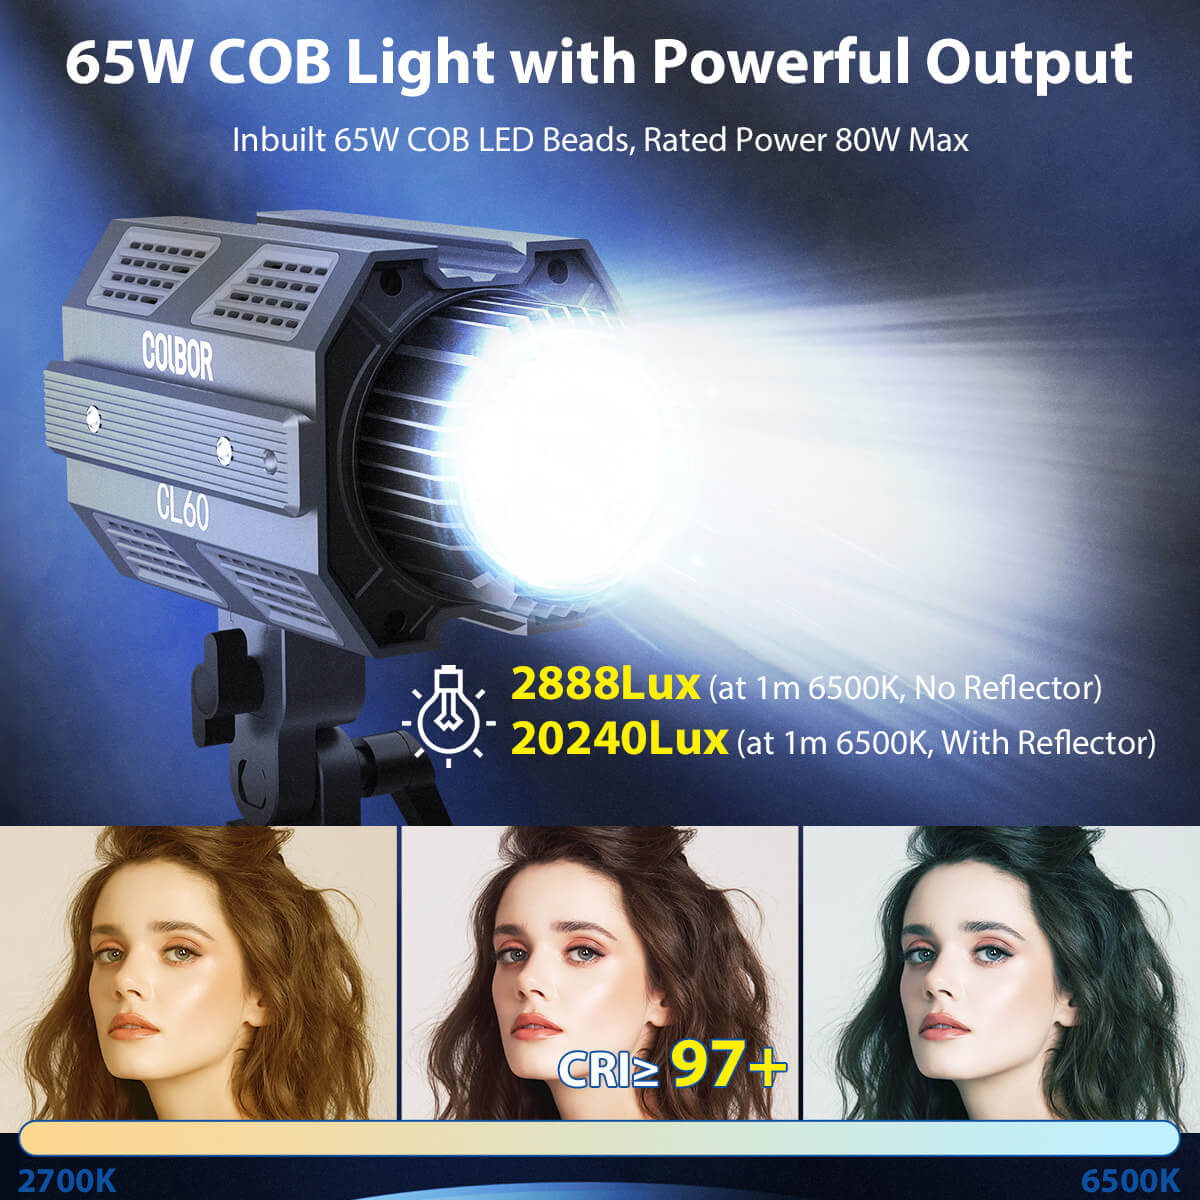 COLBOR CL60 studio light features inbuilt 65W COB LED beads and powerful max continuous output of 80W